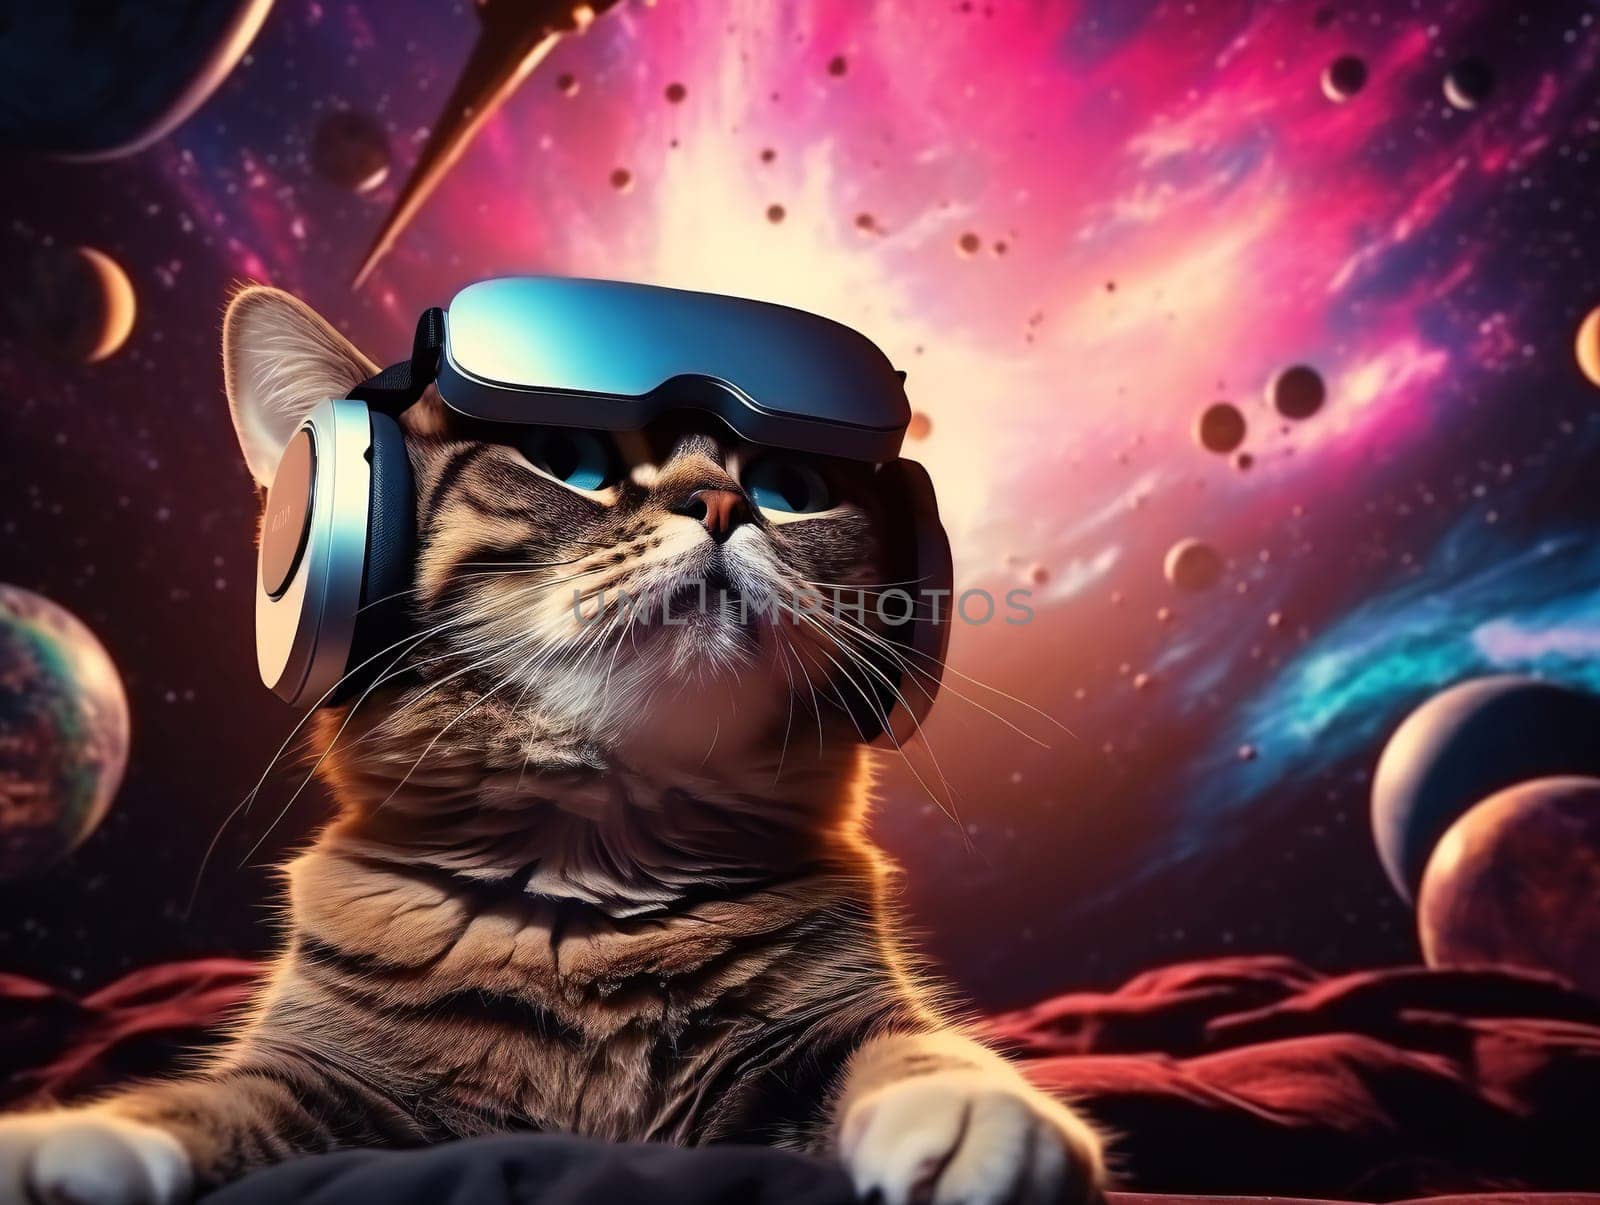 Cat wearing virtual reality goggles wireless headset. VR videogame experience futuristic aesthetics.